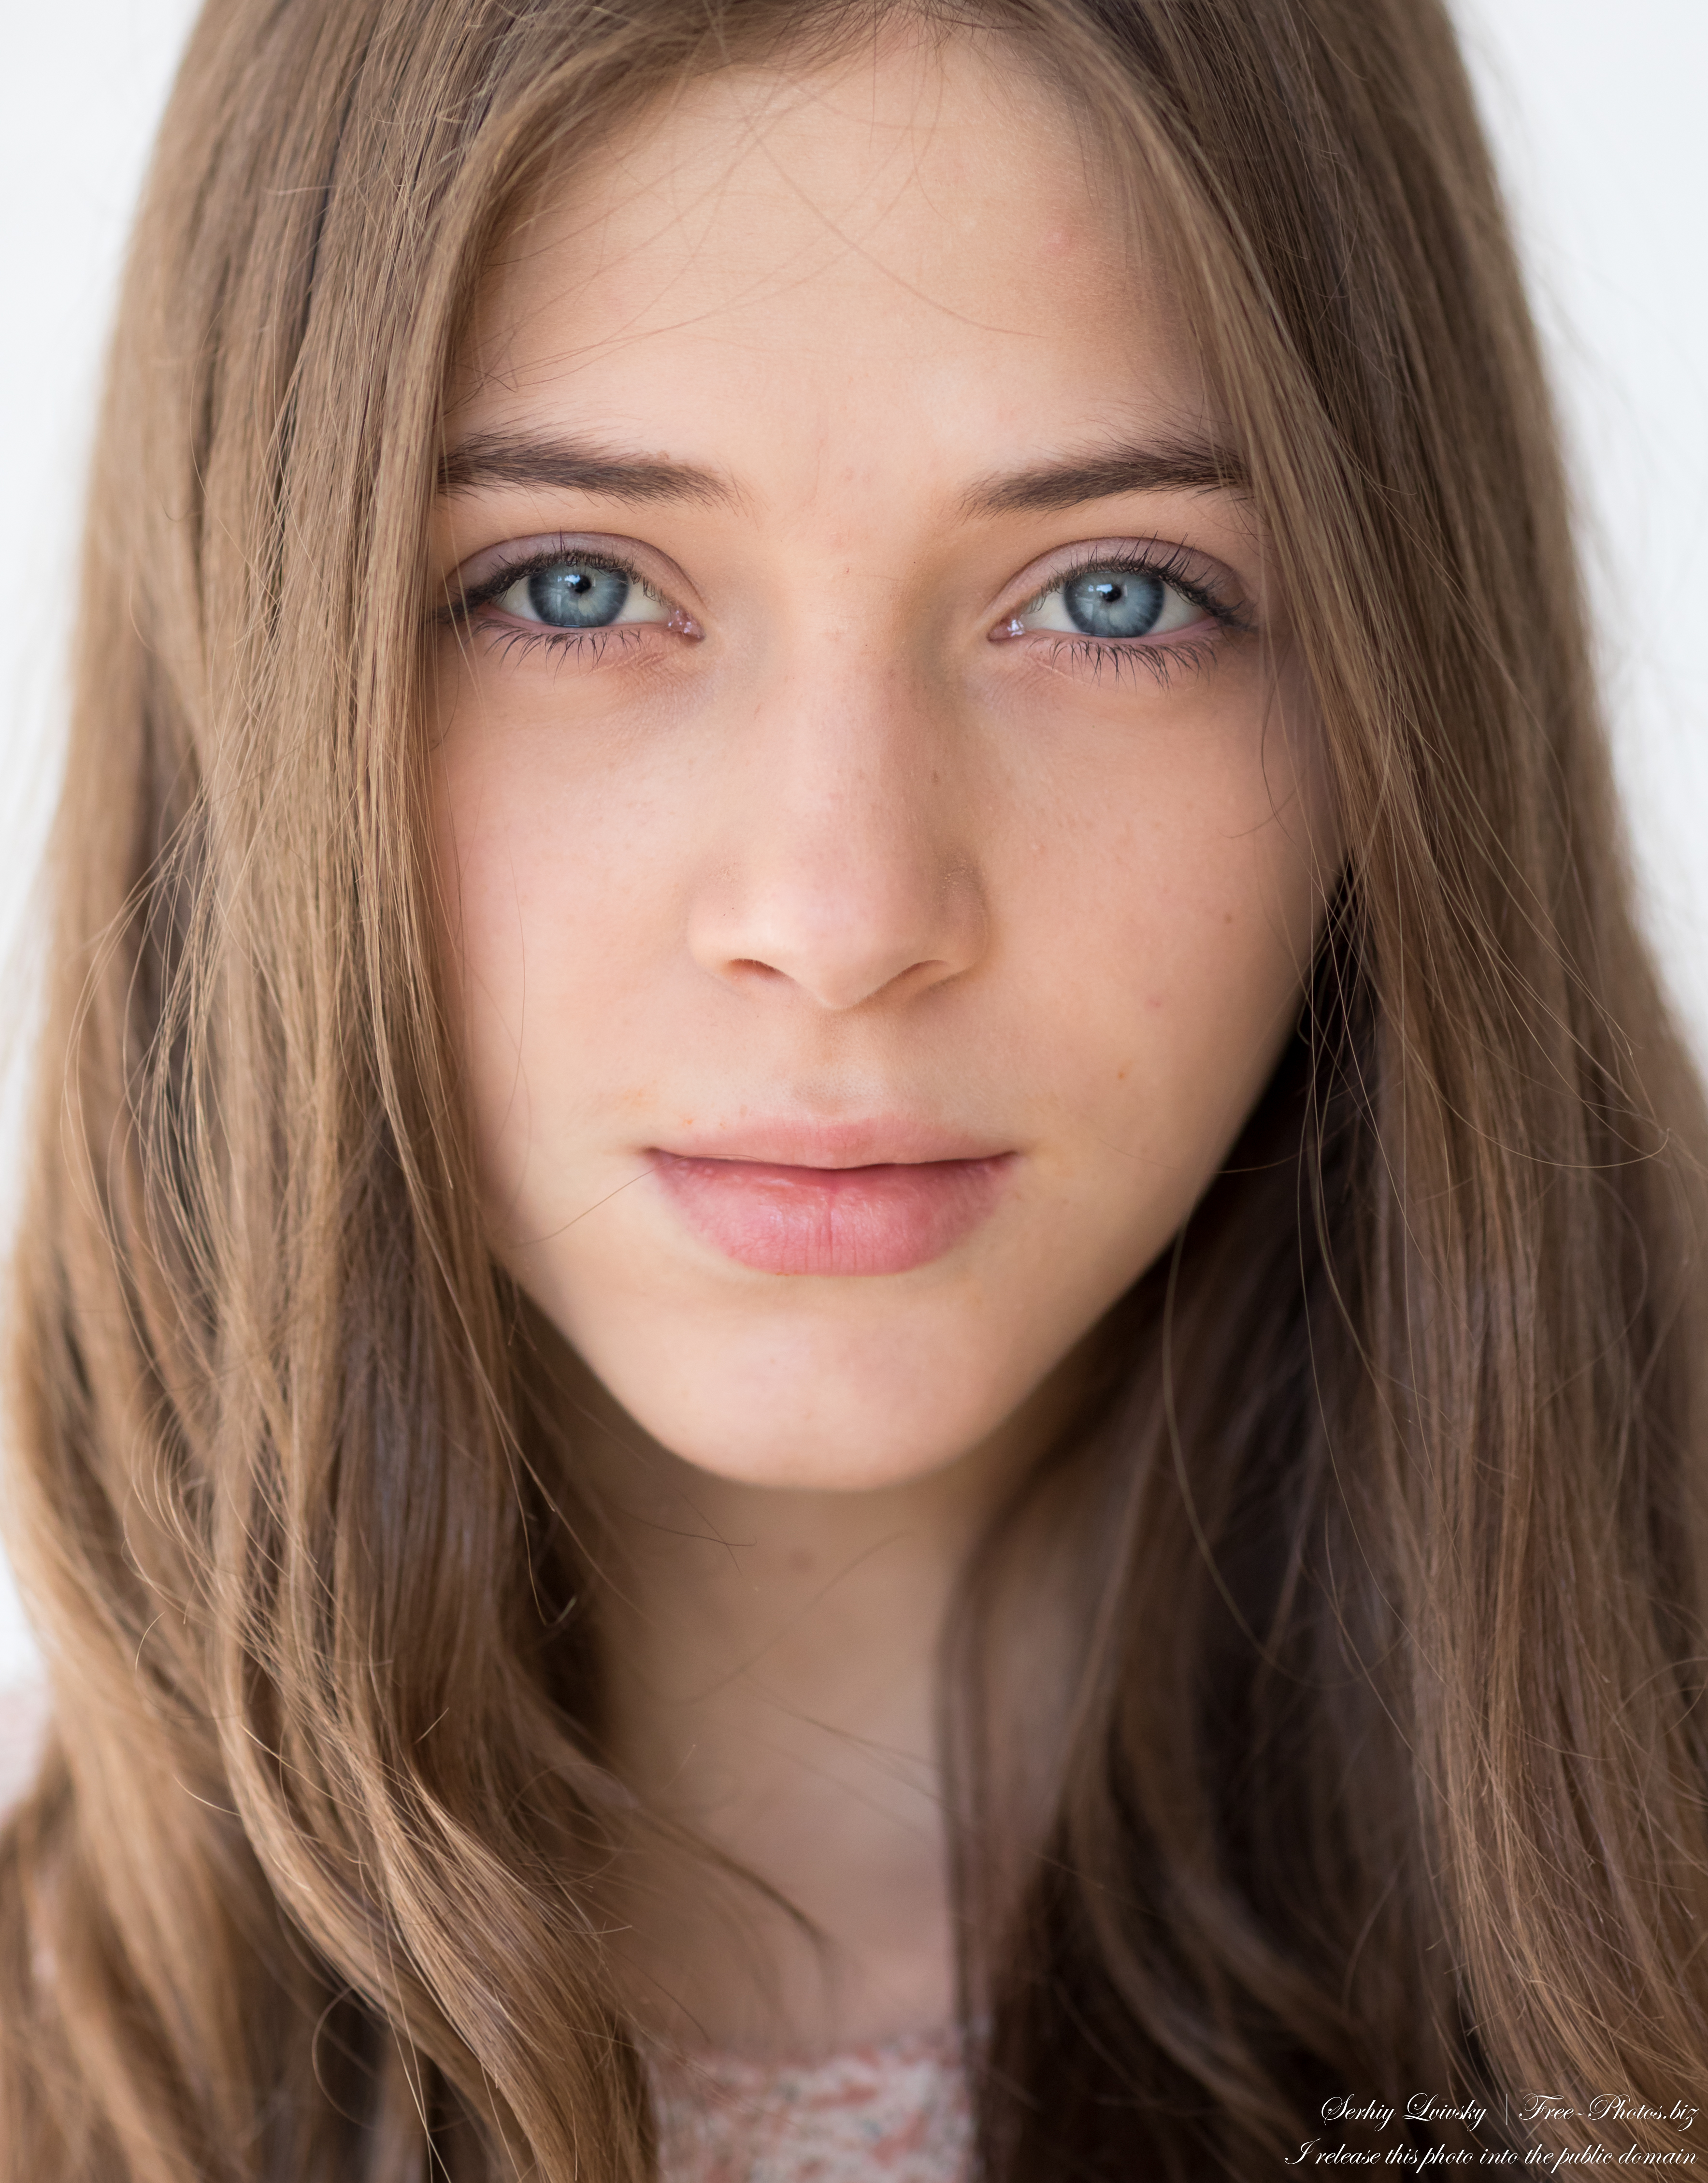 Sophia - a 17-year-old creation of God with blue eyes photographed in October 2021 by Serhiy Lvivsky, portrait 5 out of 27